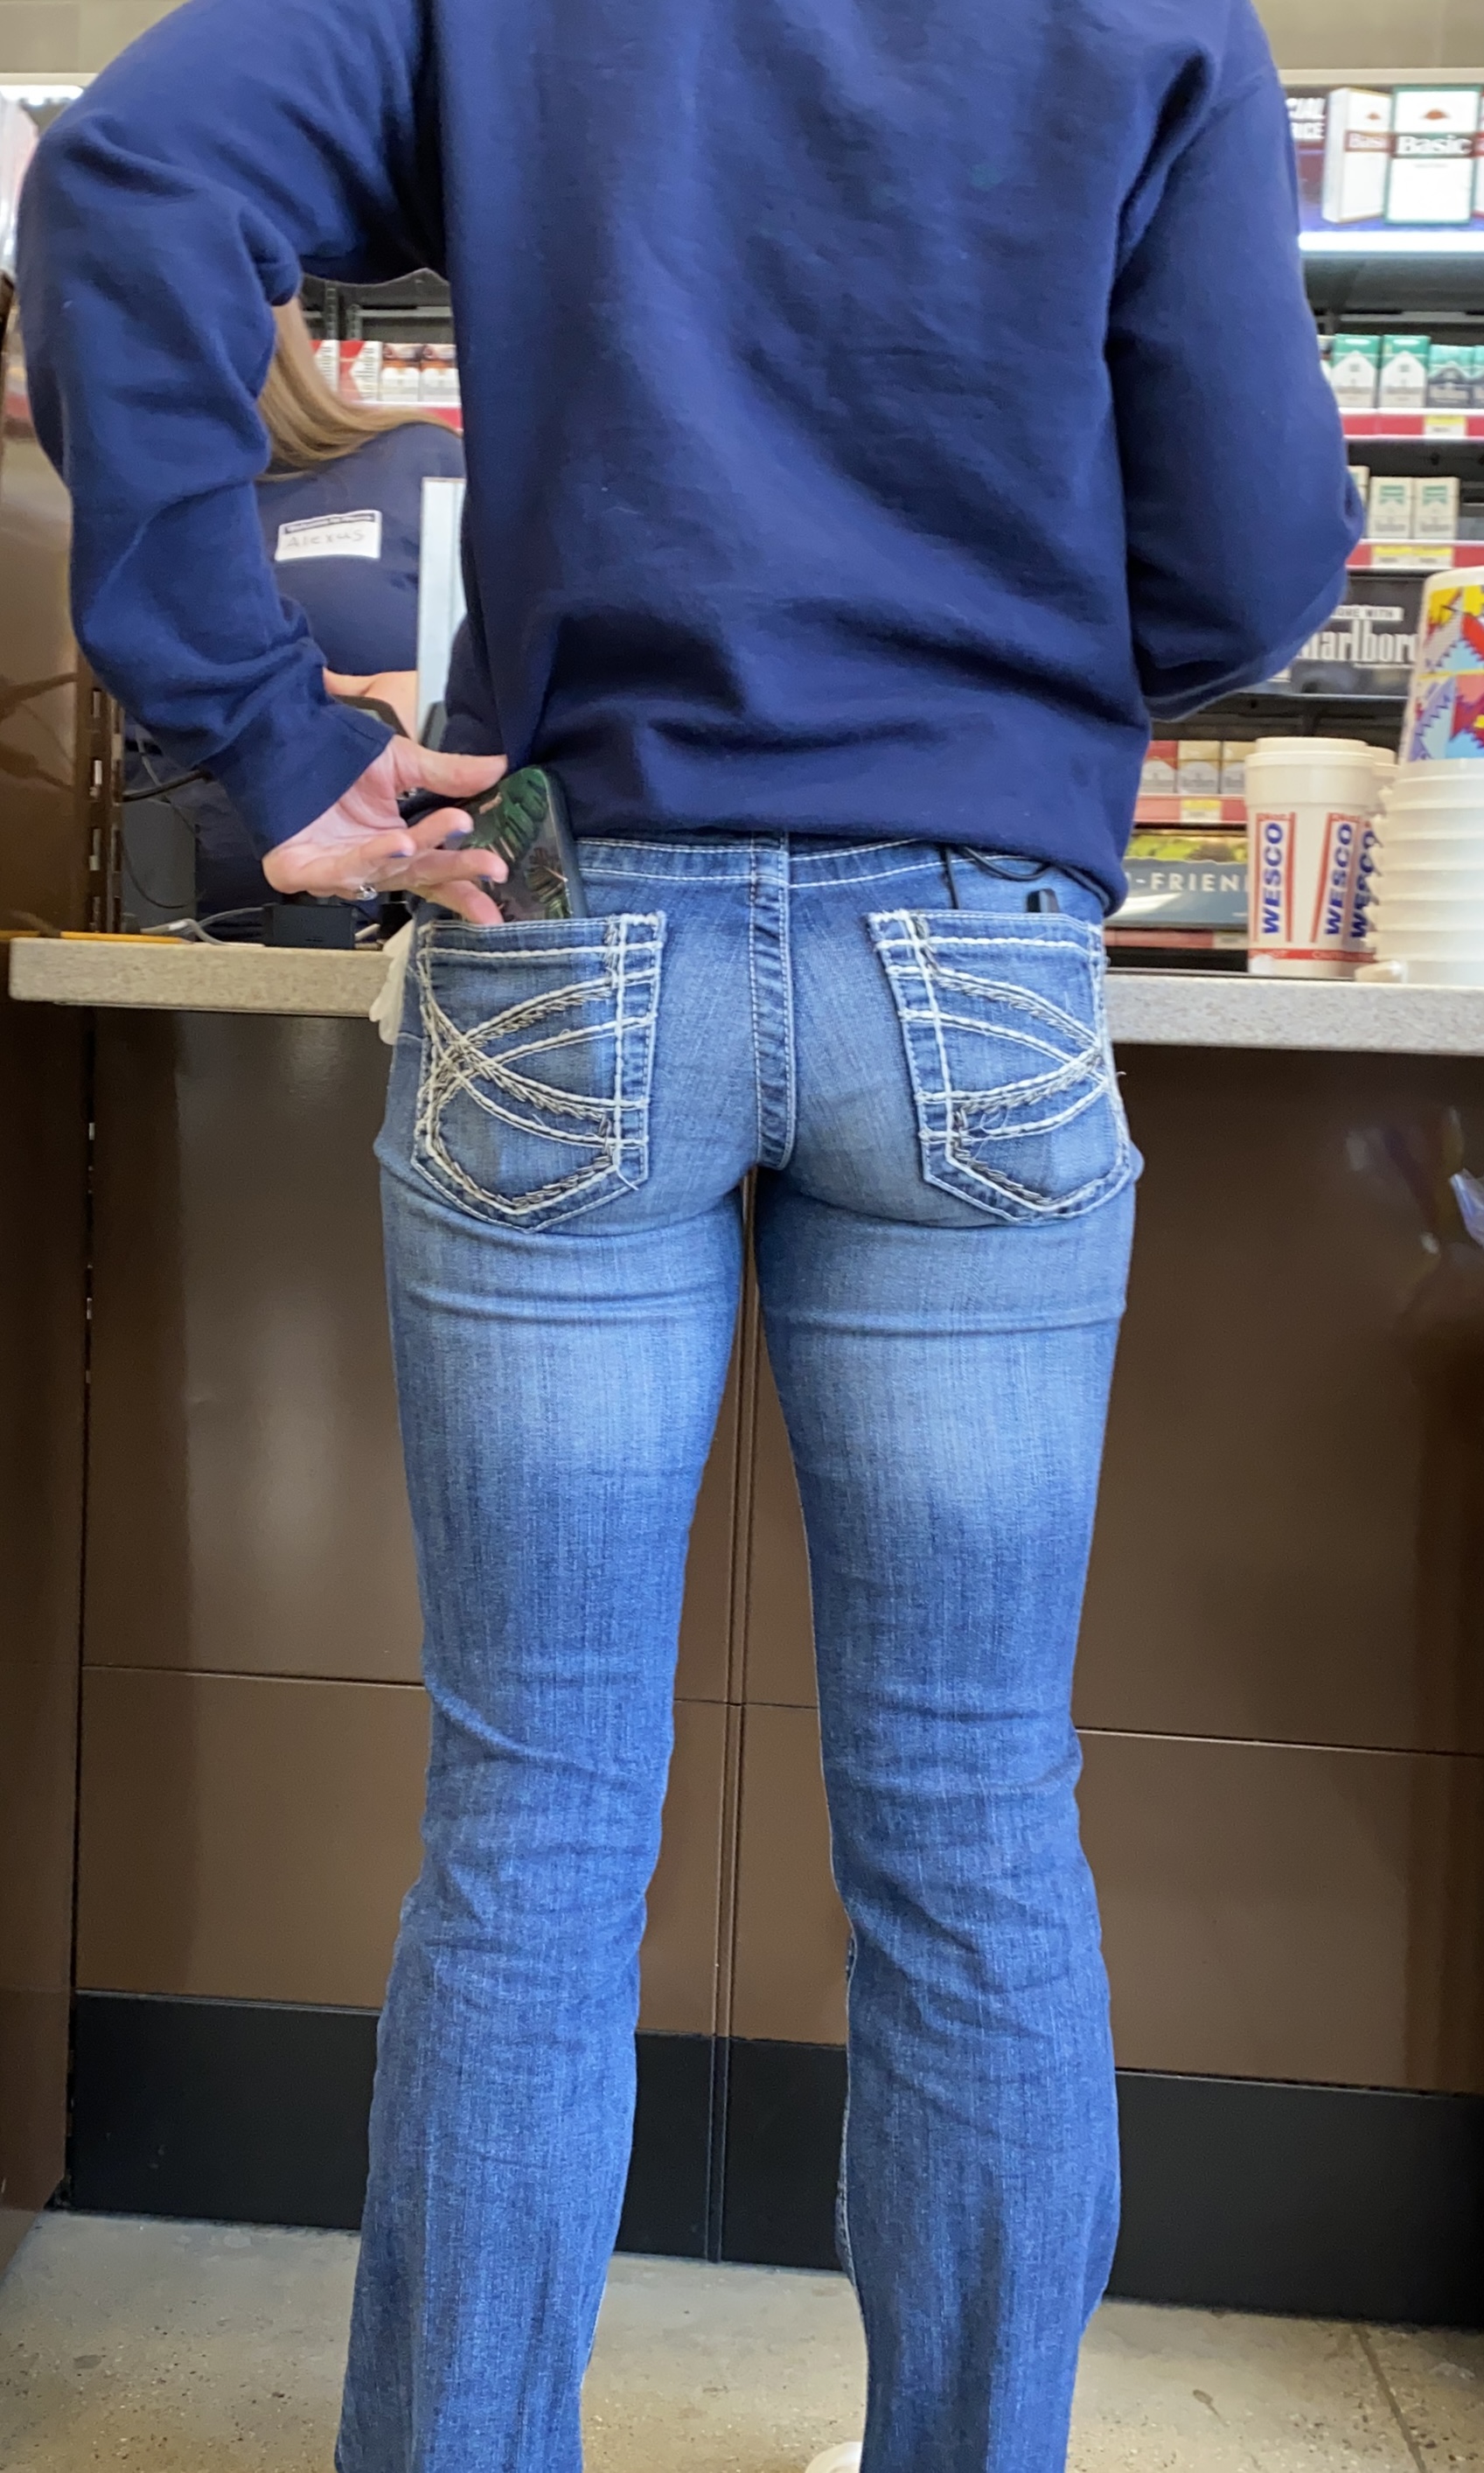 💍💍💍 “Married” gas station worker… - Tight Jeans - Forum